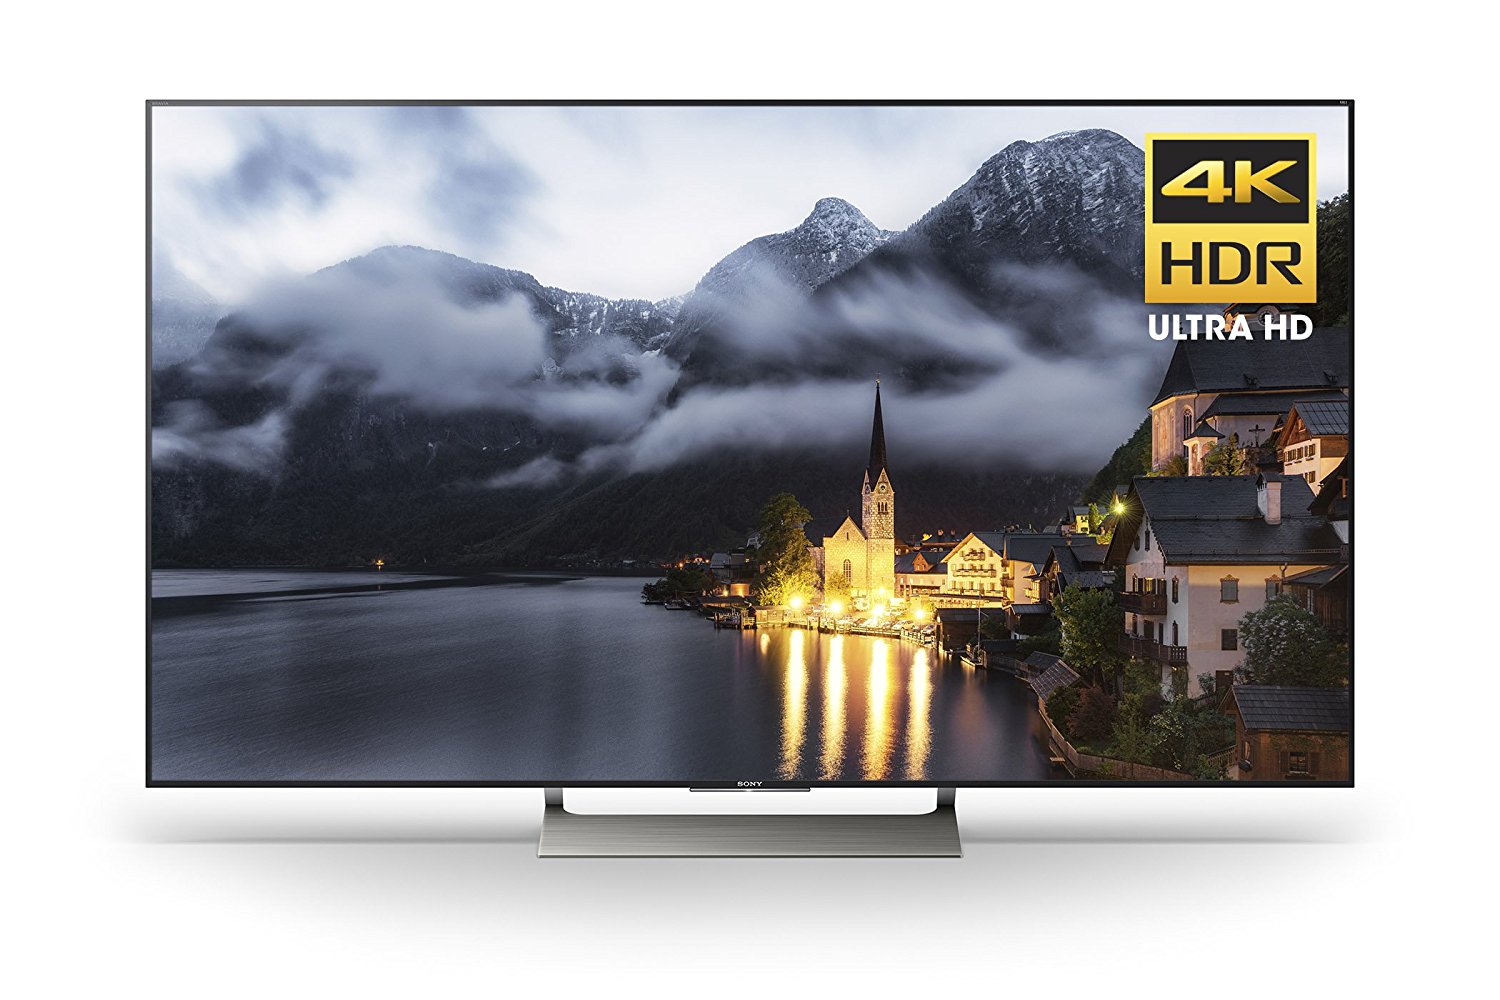 Sony XBRX900E TV (55-inch) product image